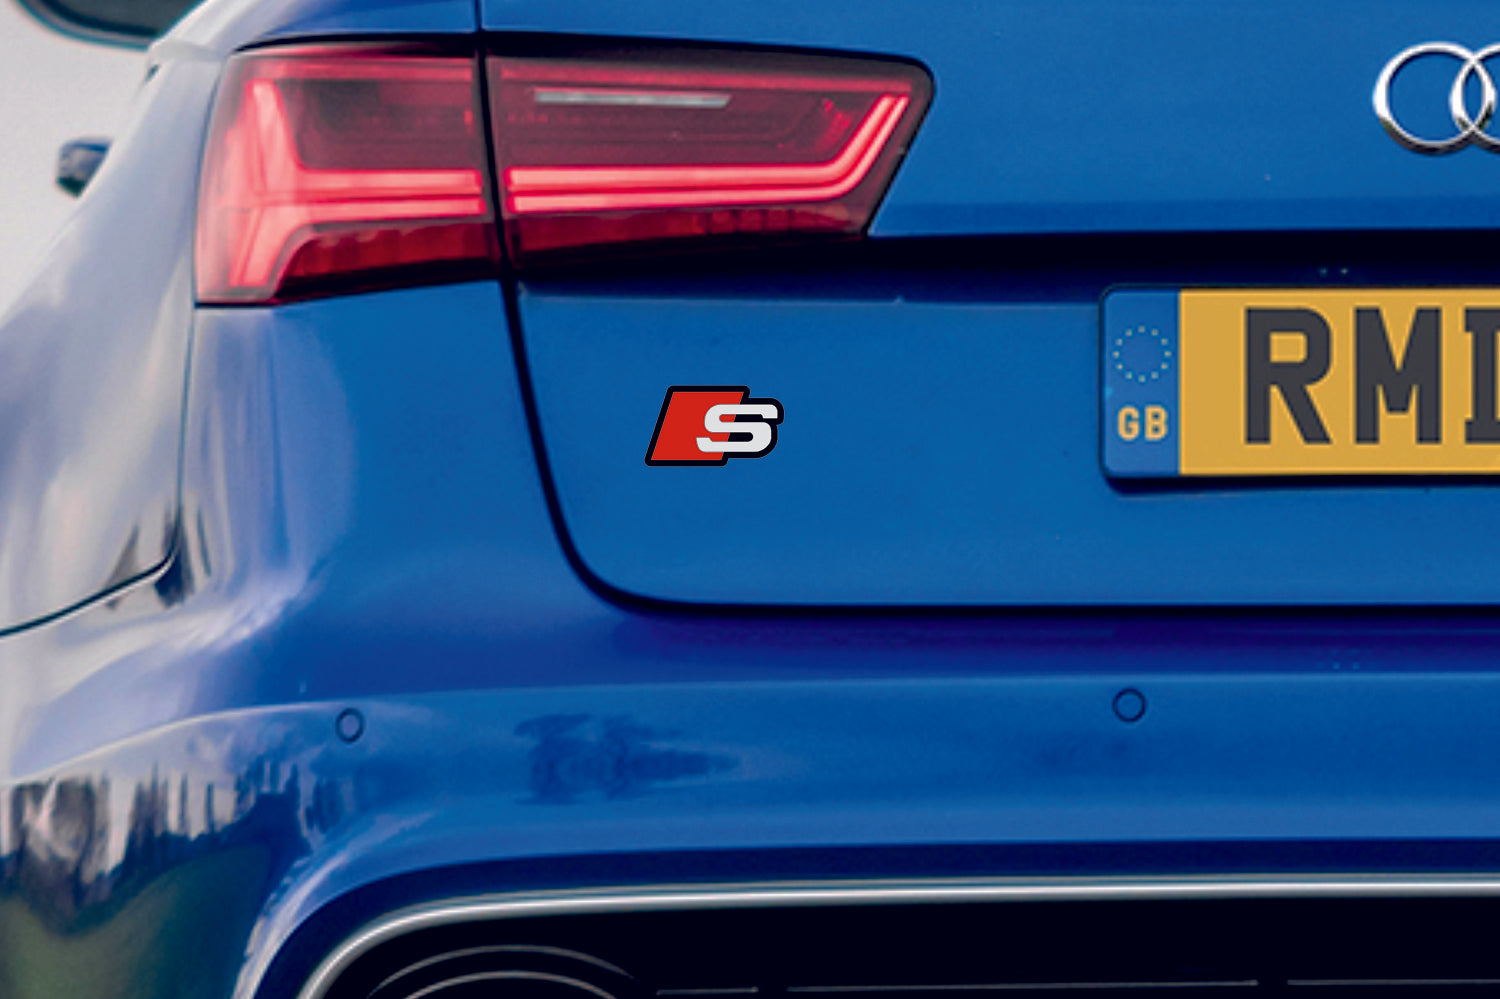 Audi S tailgate trunk rear emblem with S logo - decoinfabric